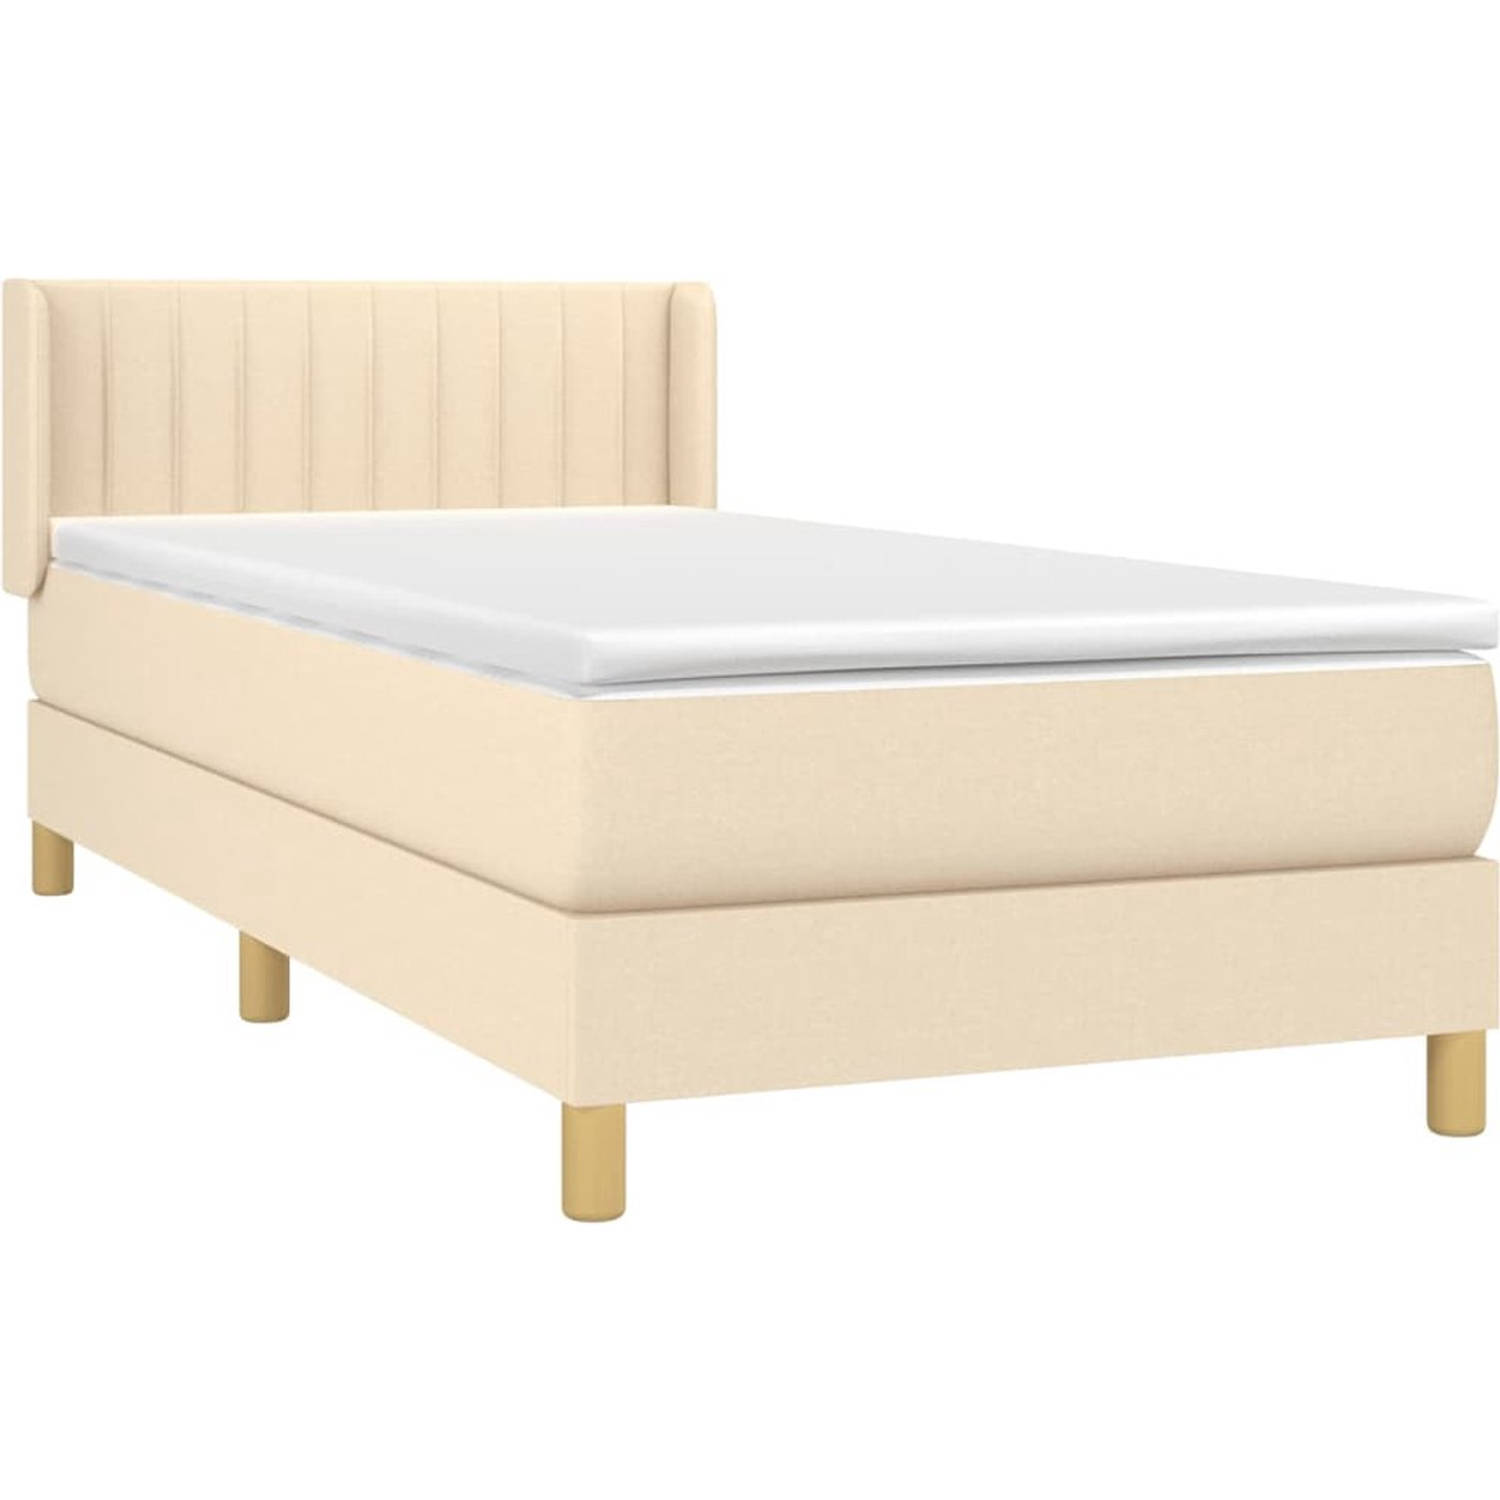 The Living Store Boxspringbed - Comfort - Bed - 203 x 93 x 78/88 cm - Crème